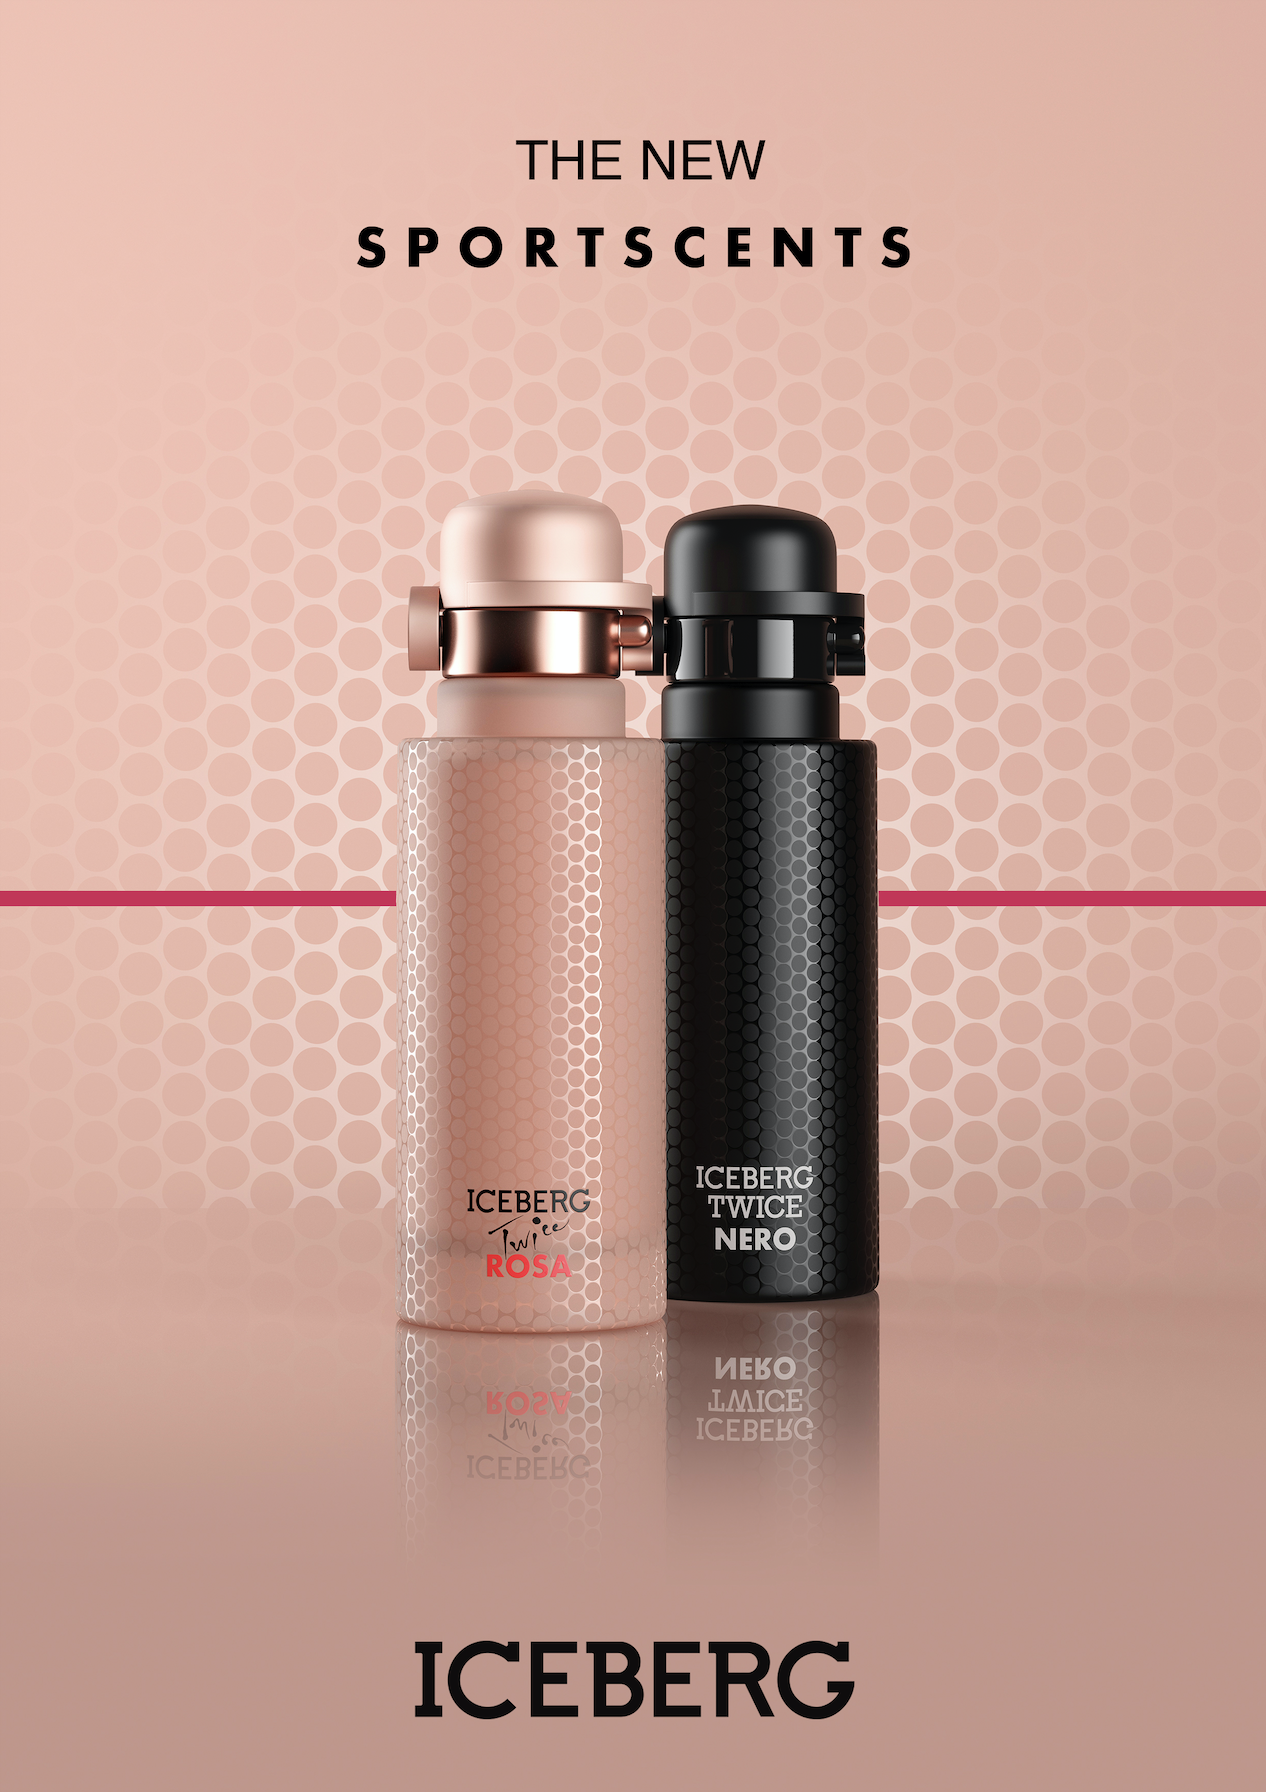 New Sportscents by Iceberg: Nero New Fragrances Twice ~ Rosa and